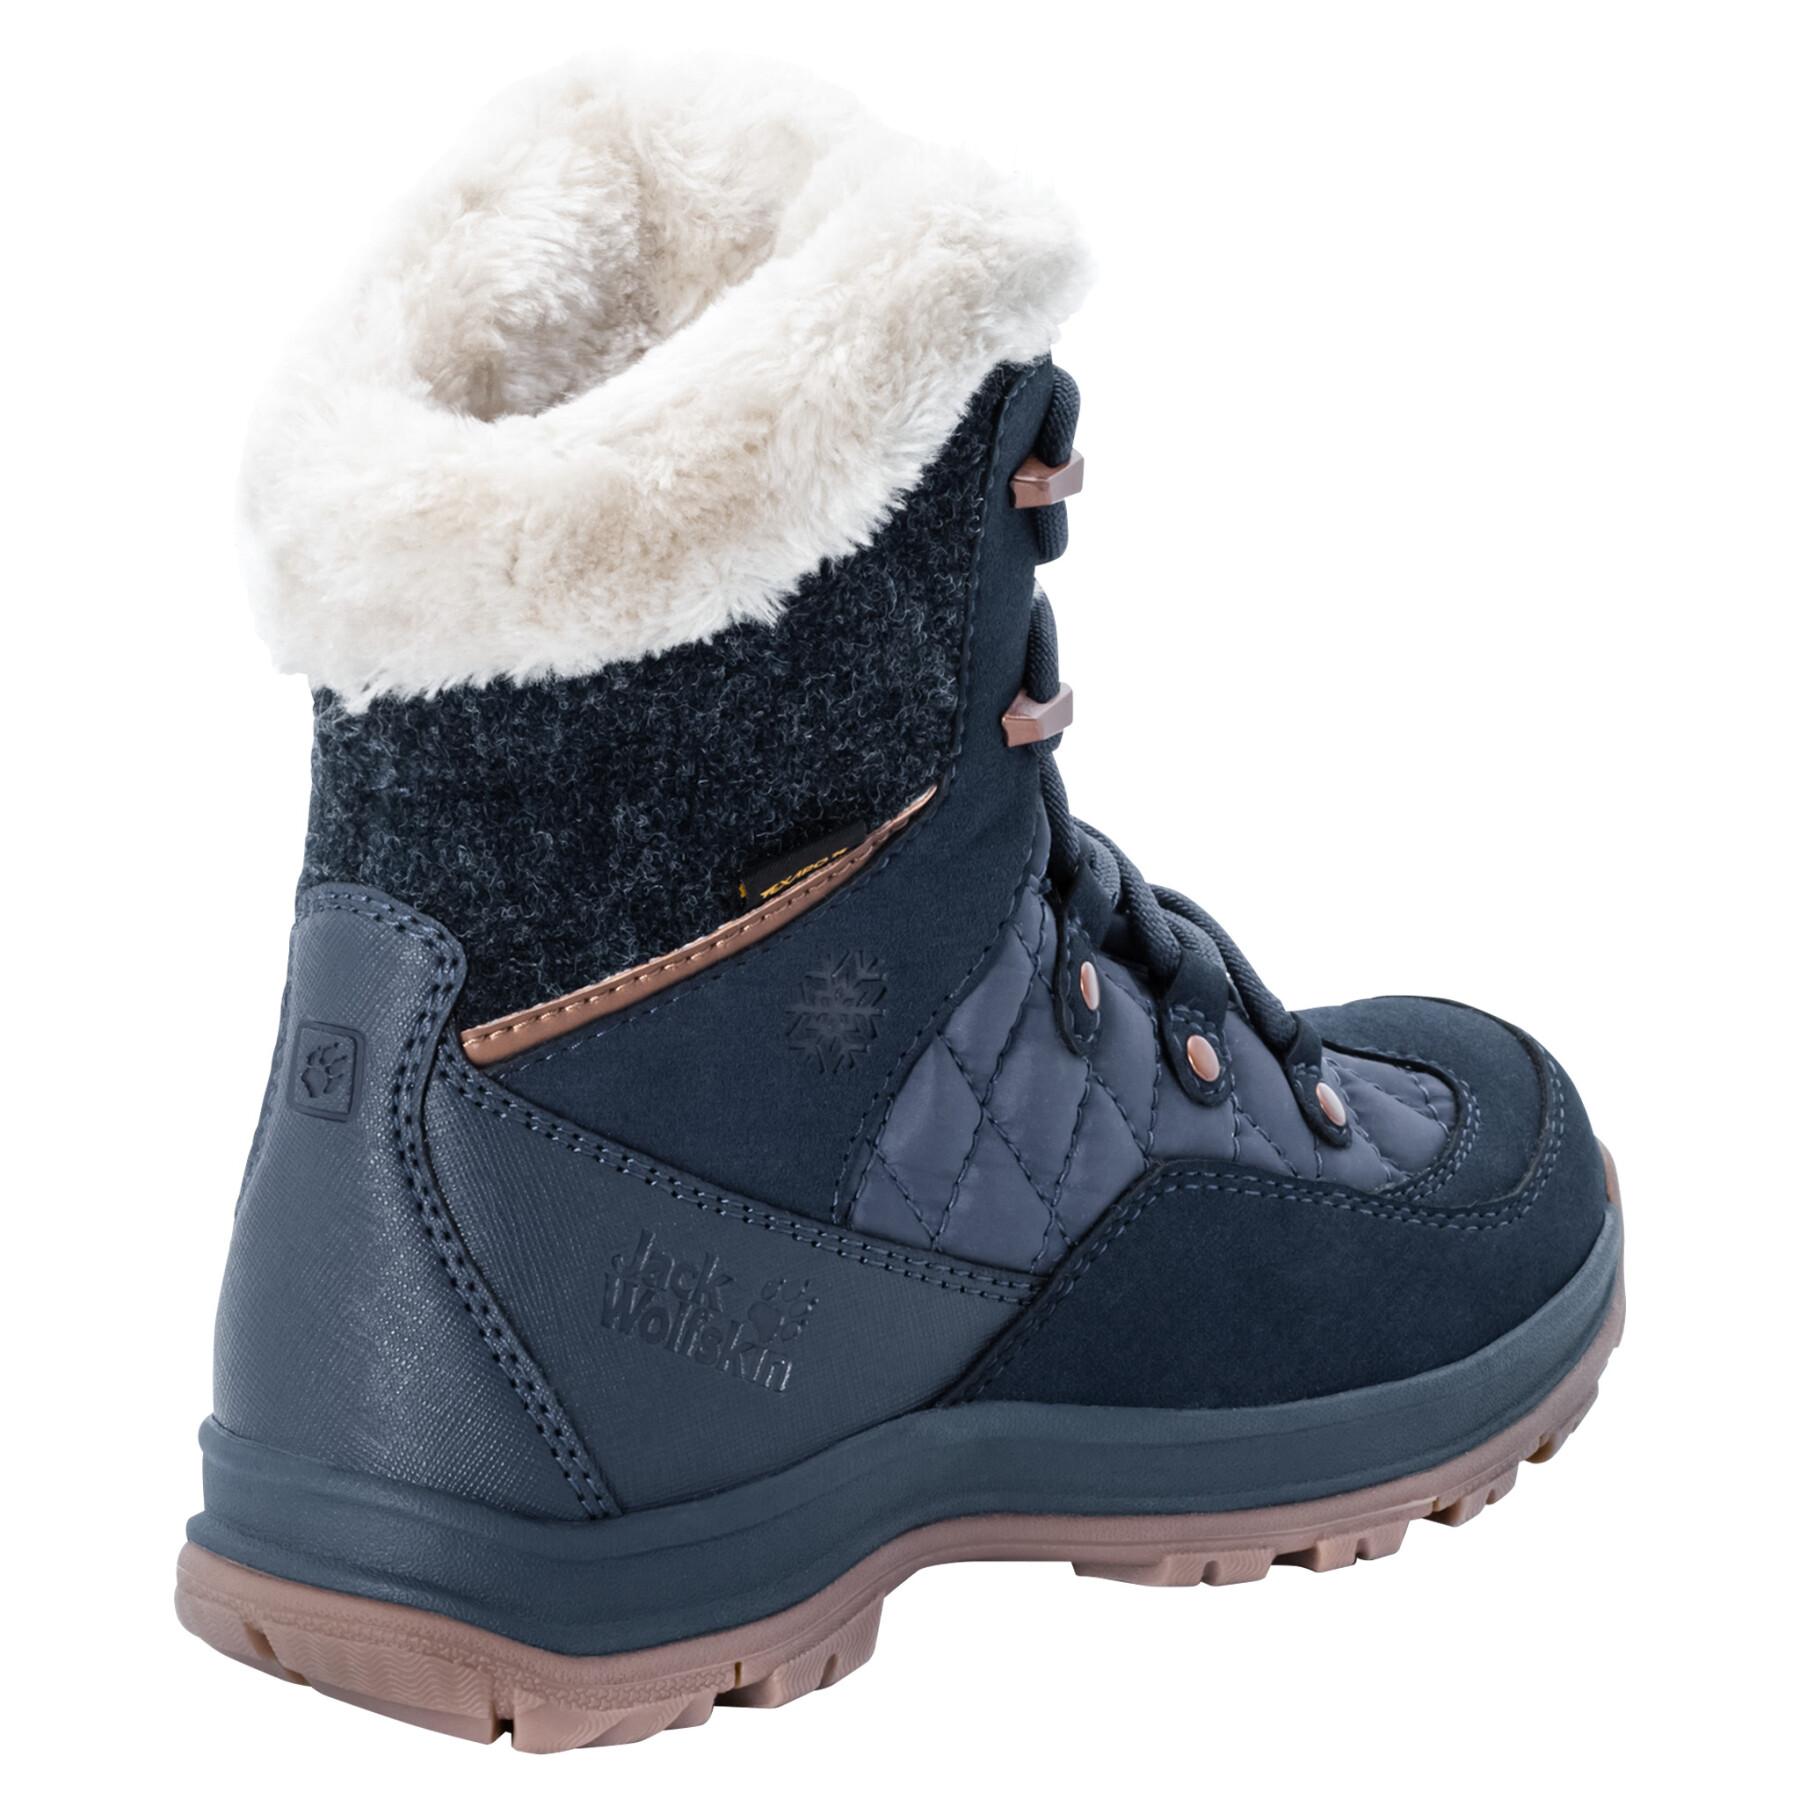 Women's shoes Jack Wolfskin cold bay texapore mid